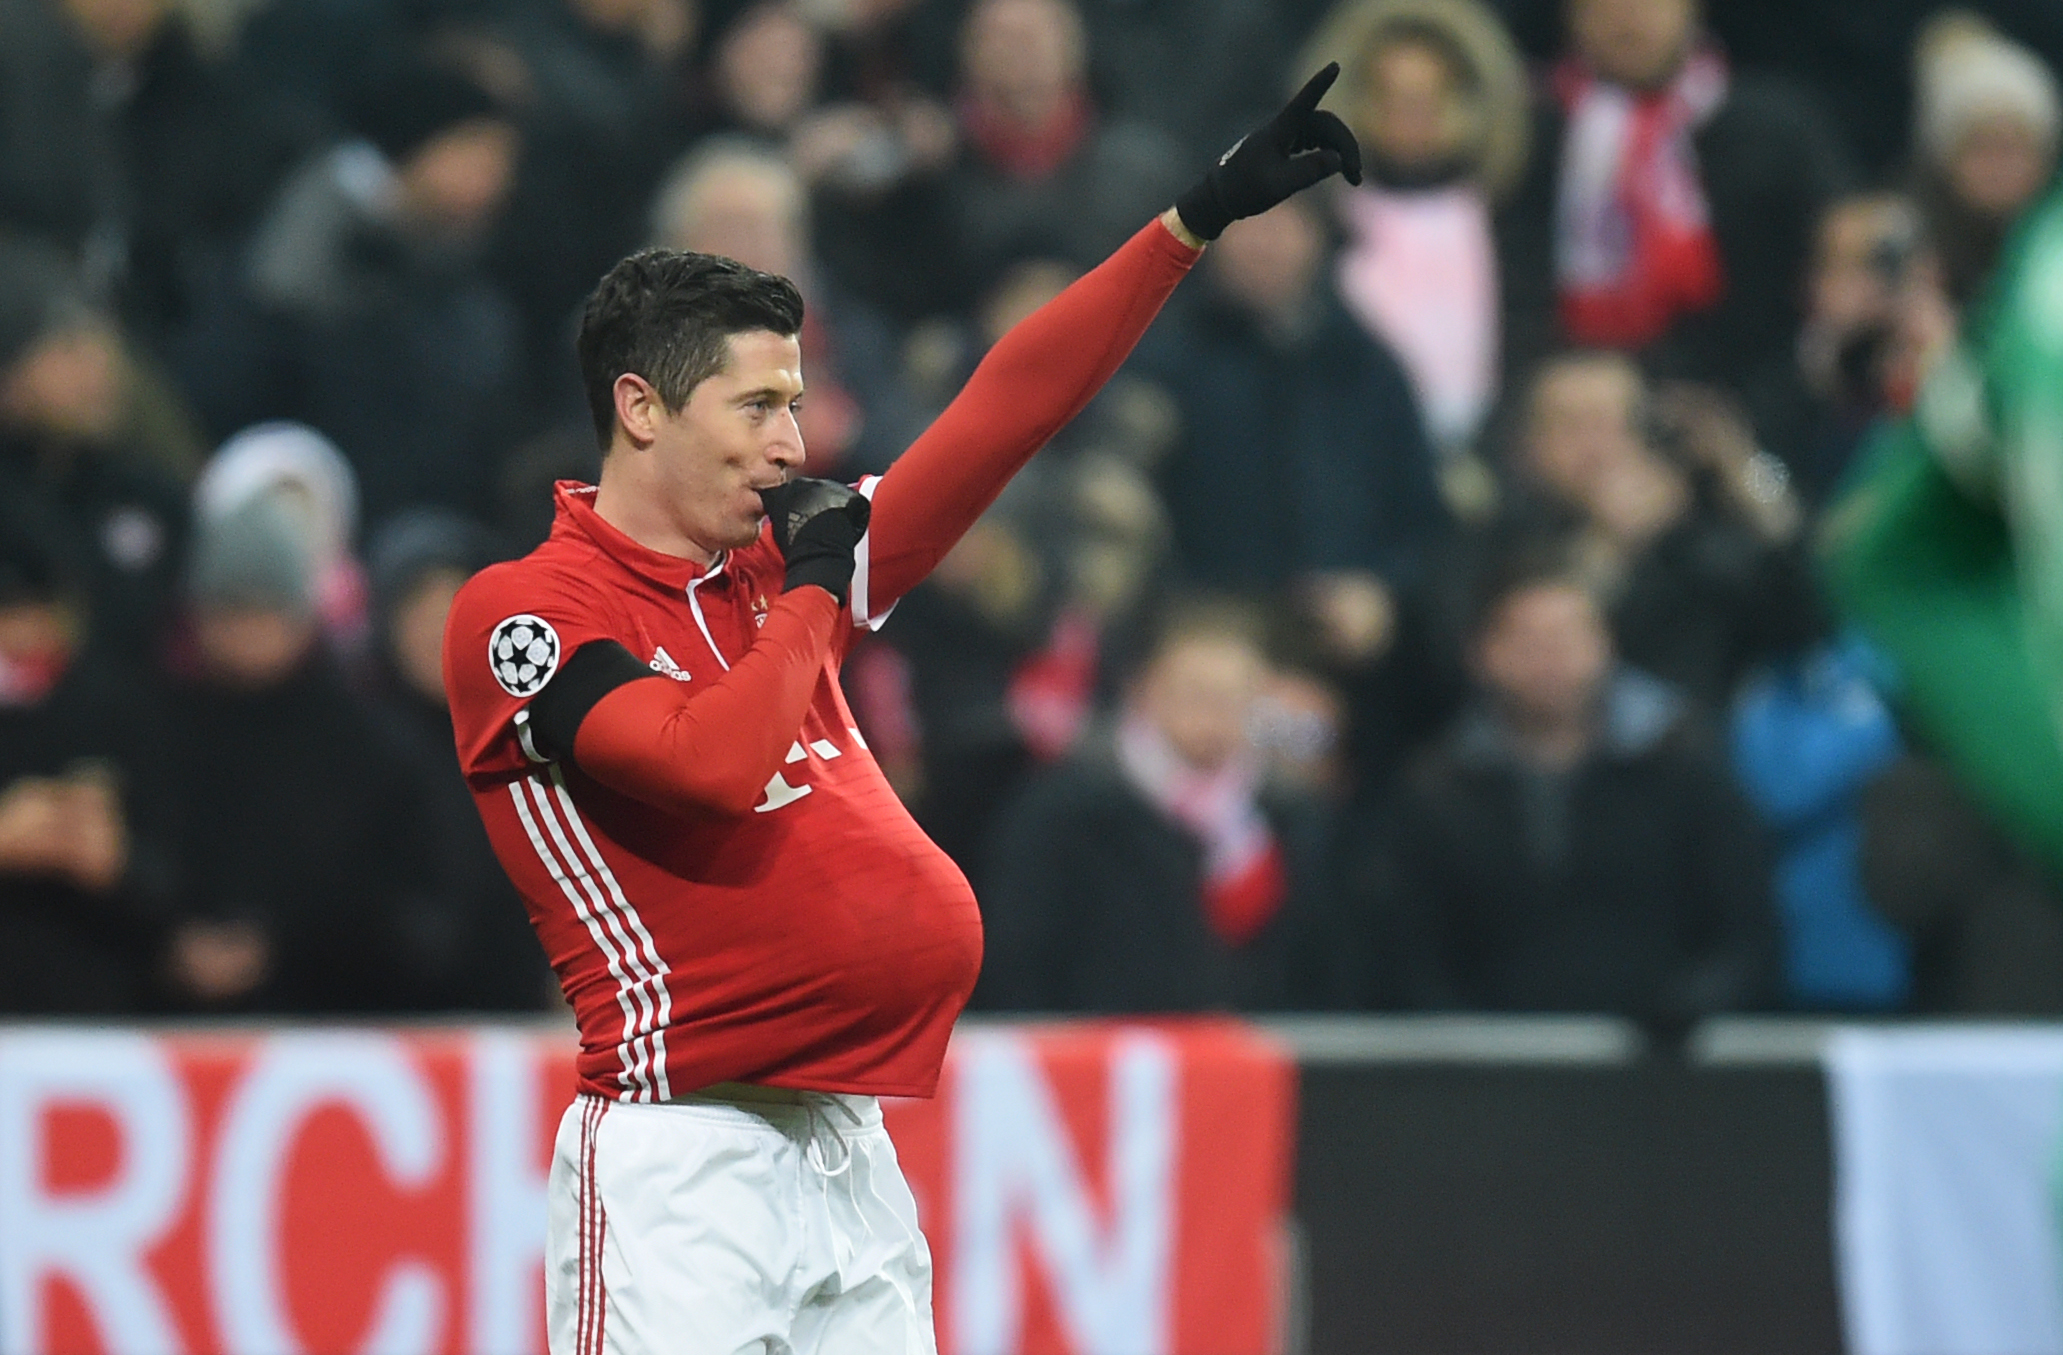 Bayern Munich's Polish striker Robert Lewandowski celebrates scoring the opening goal during the UEFA Champions League group D football match between FC Bayern Munich and Atletico Madrid in Munich, southern Germany, on December 6, 2016.  / AFP / CHRISTOF STACHE        (Photo credit should read CHRISTOF STACHE/AFP/Getty Images)